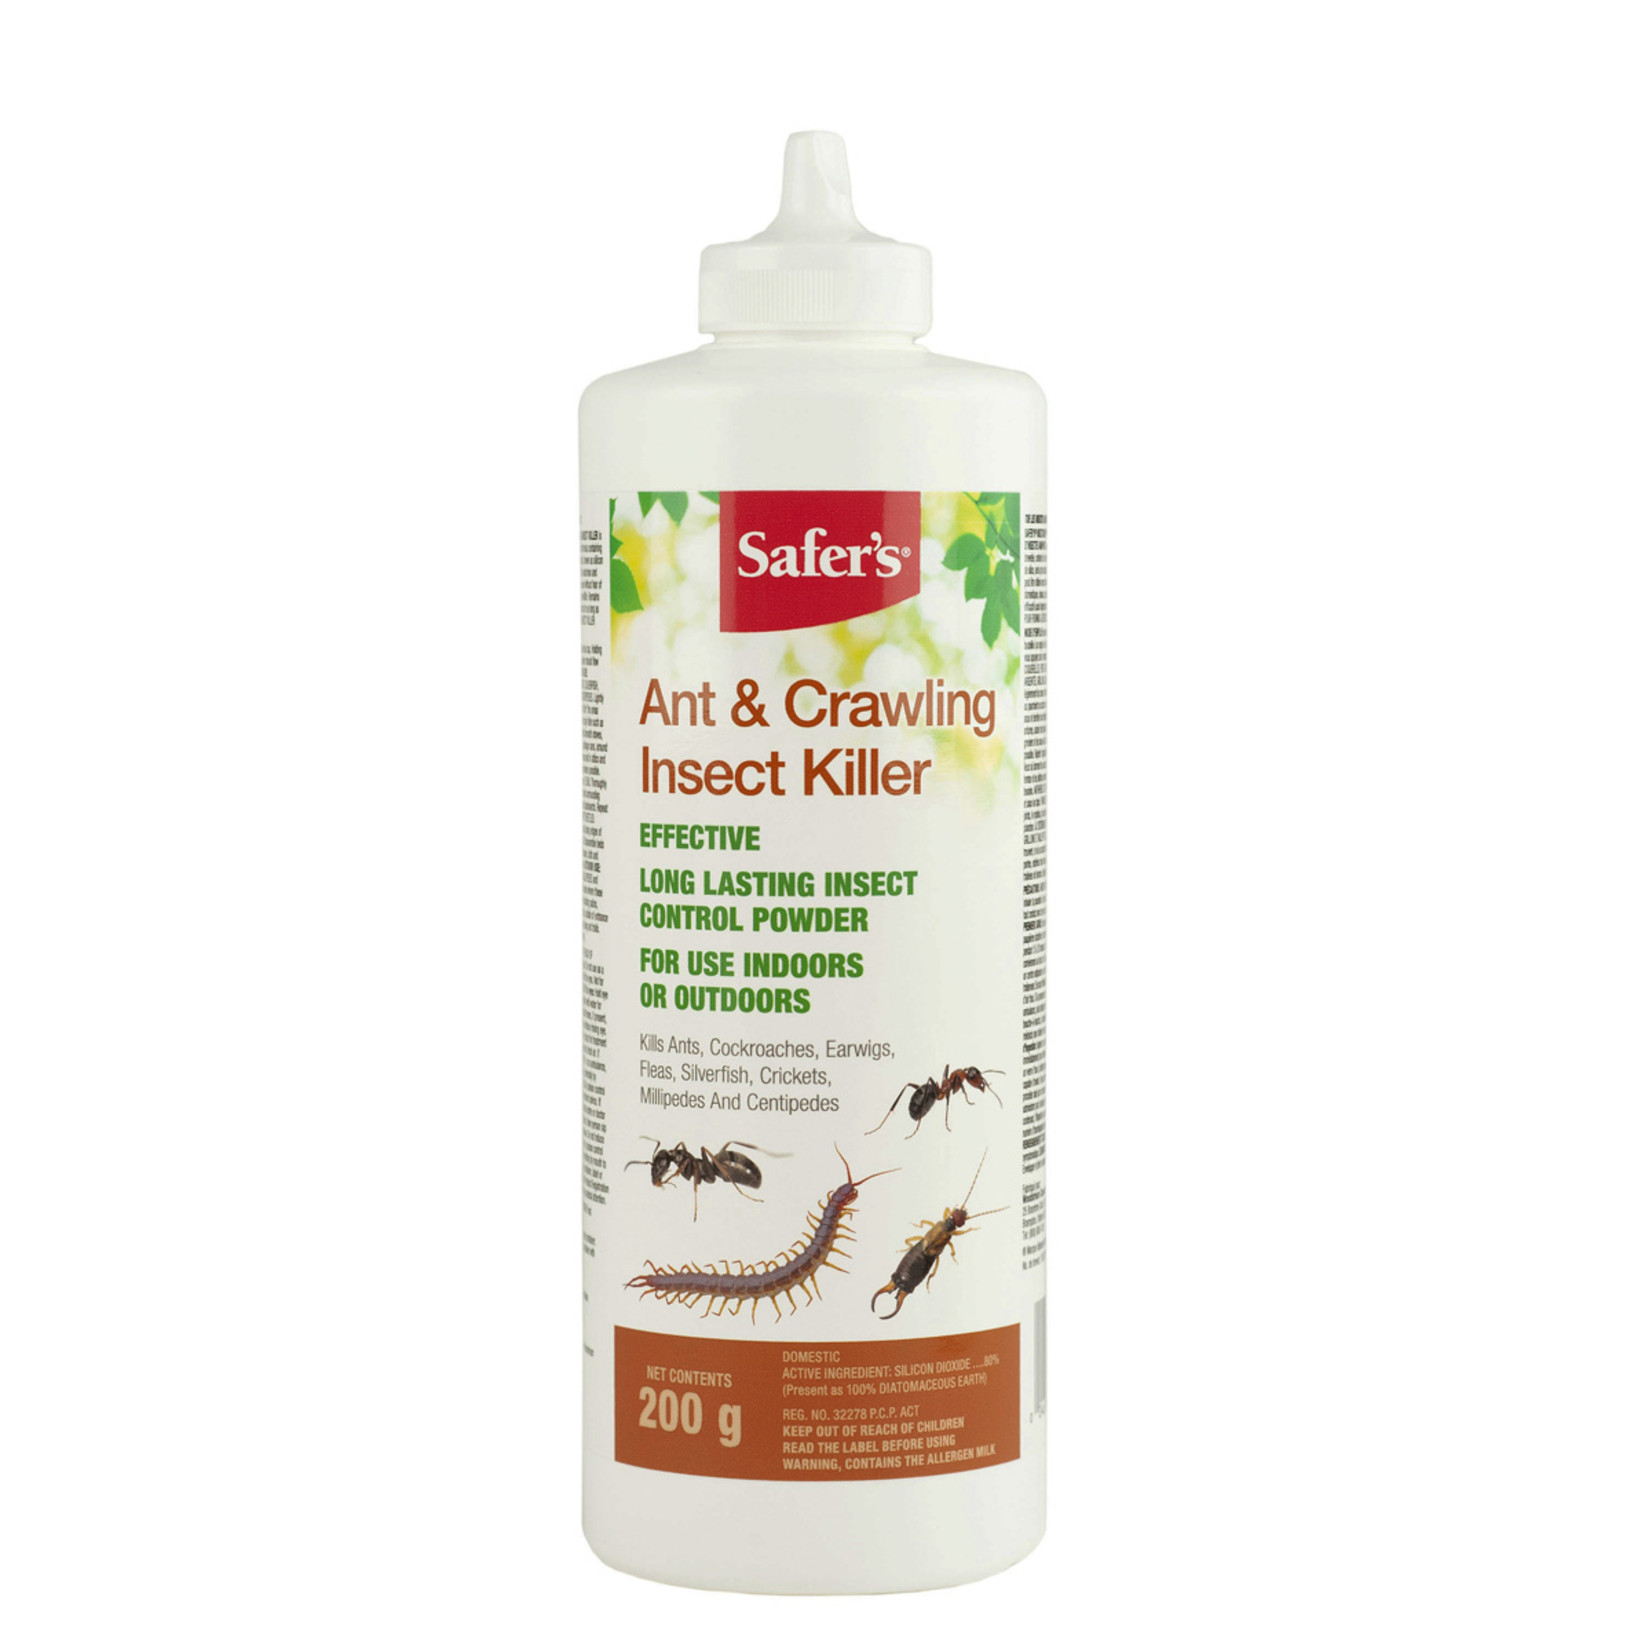 Safer's Ant & Crawling Insect Killer